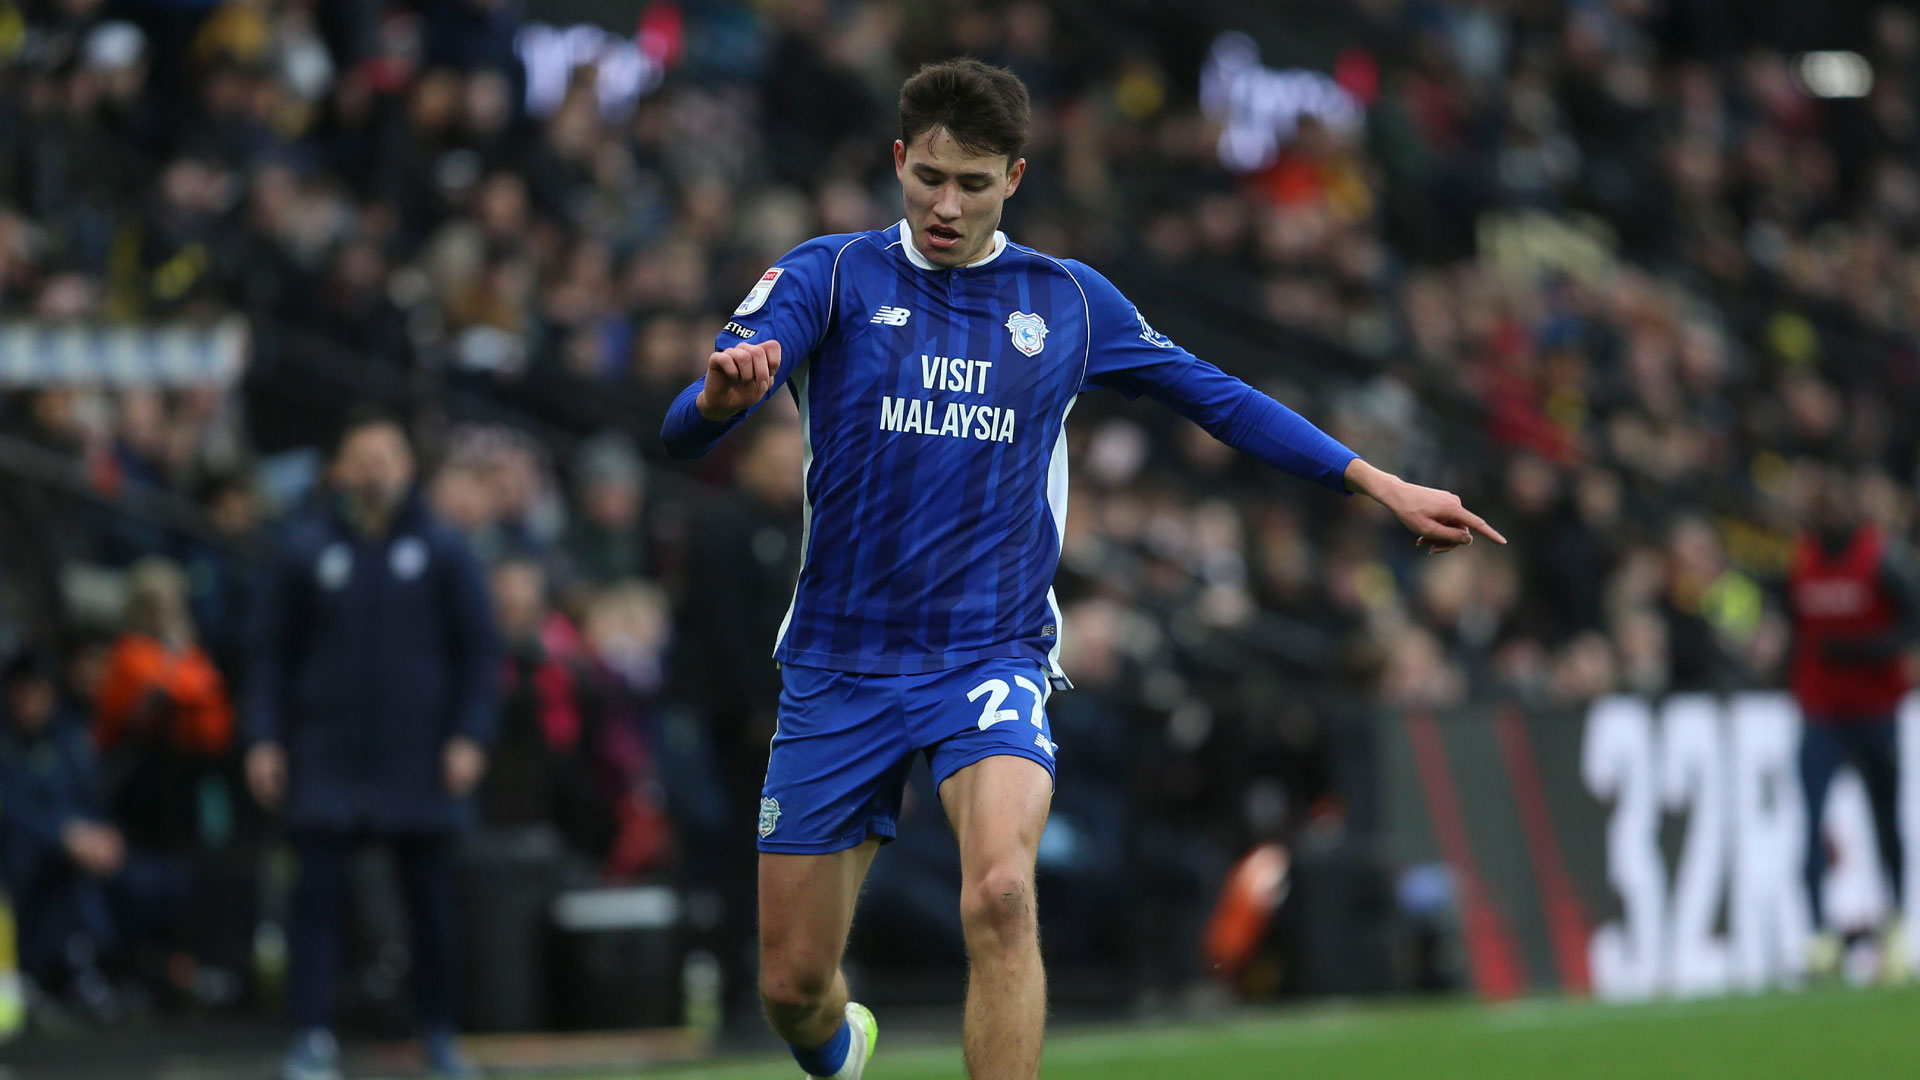 Rubin Colwill in action for Cardiff City